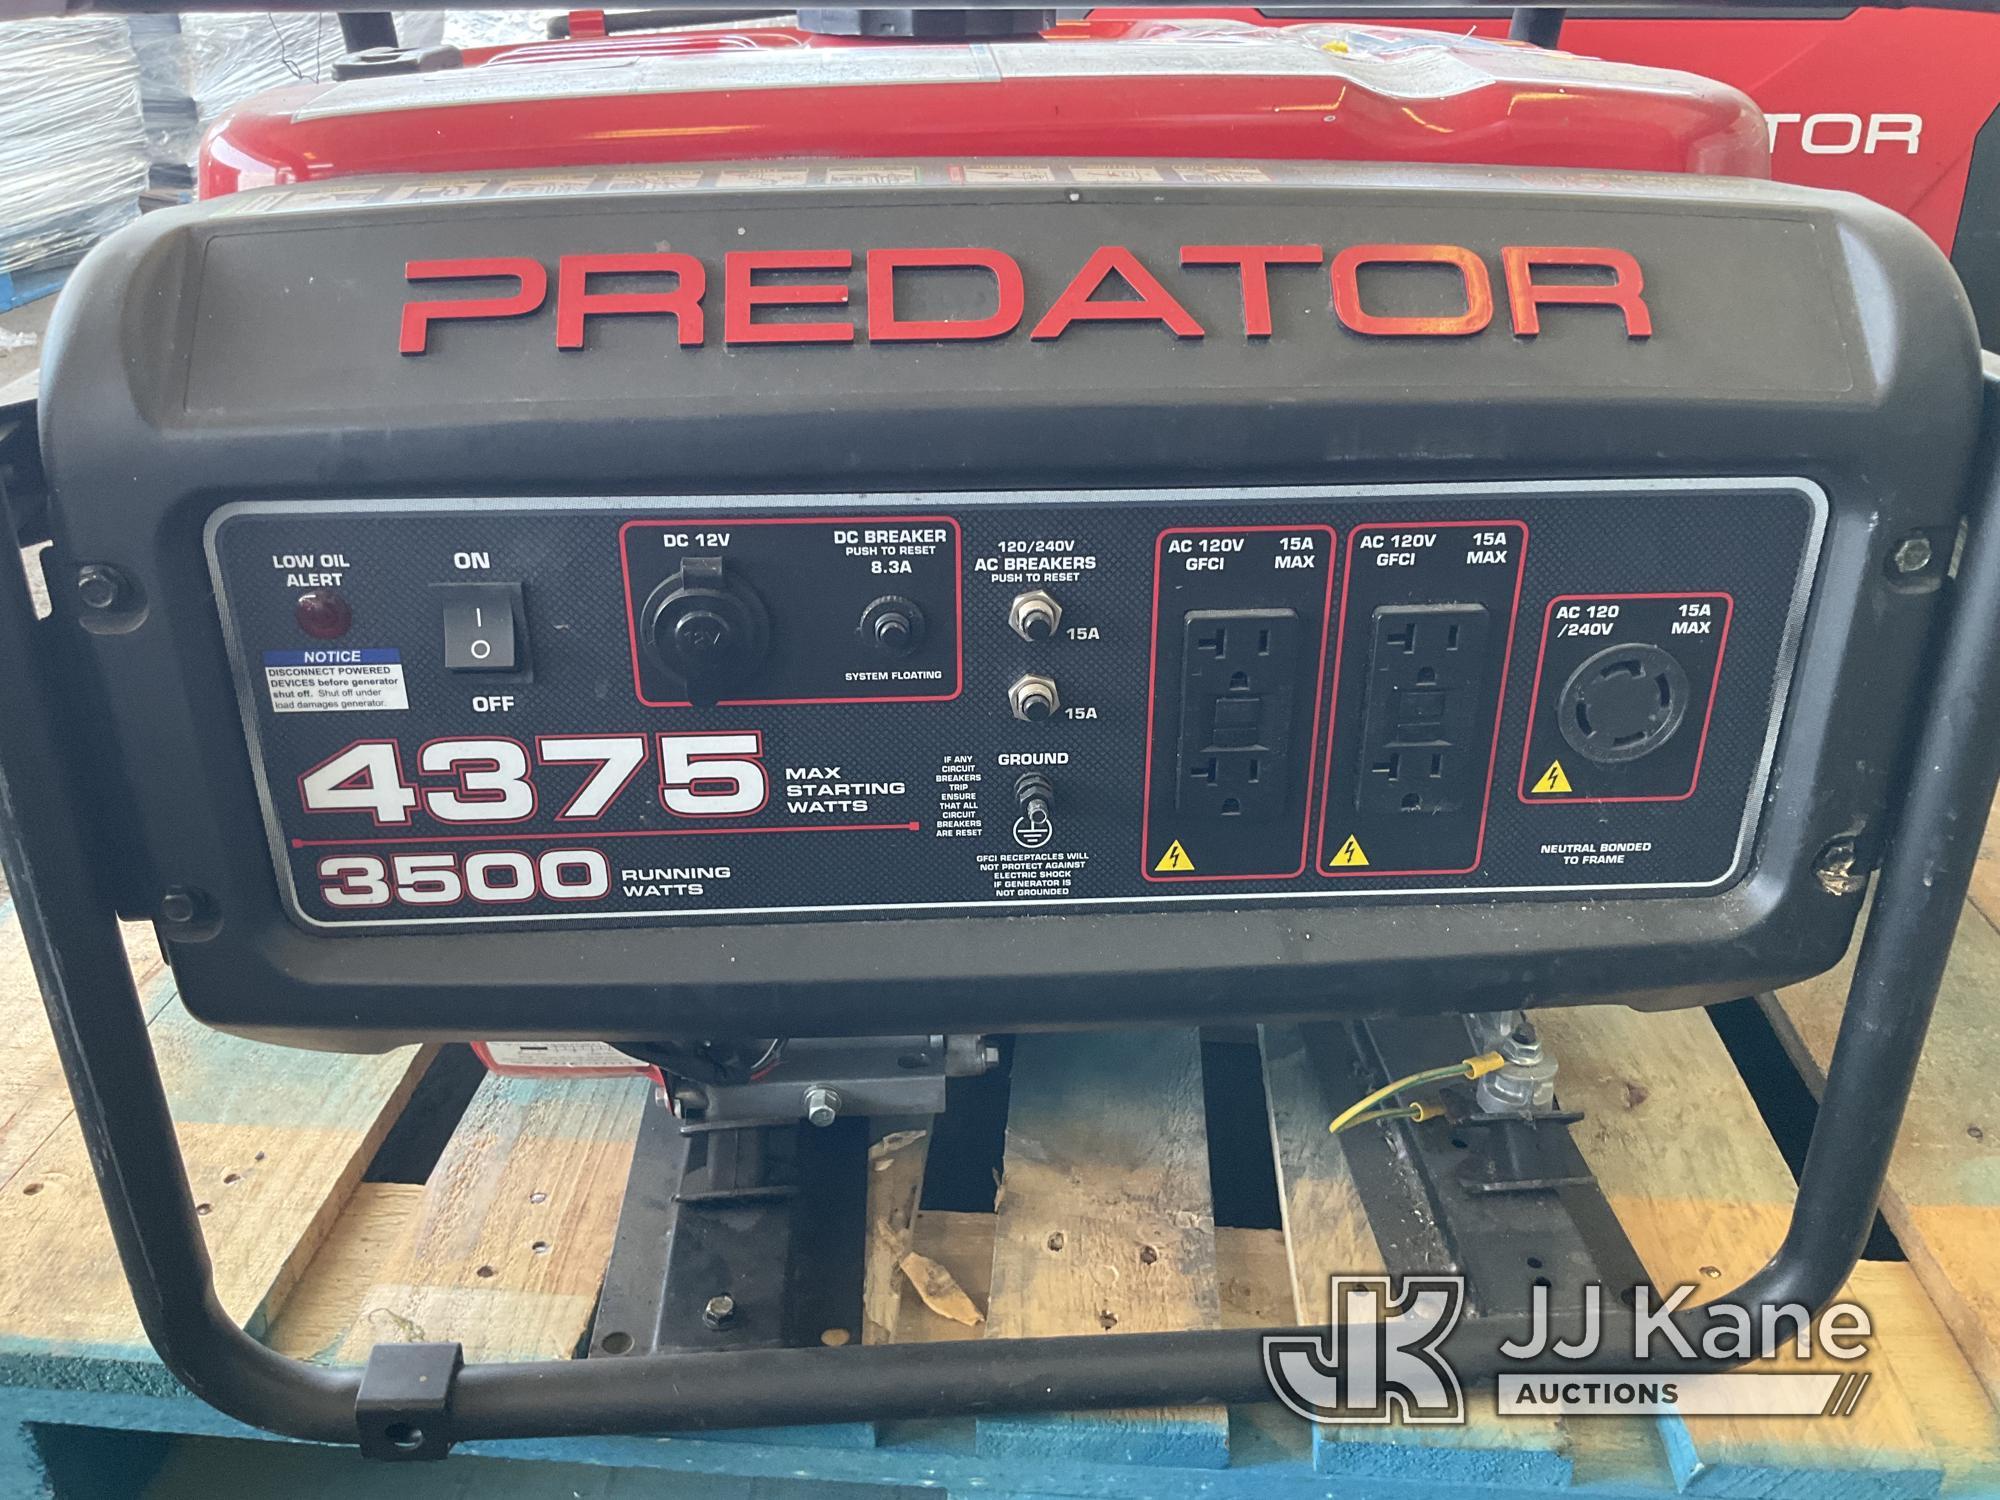 (Jurupa Valley, CA) 1 Predator 4375 Generator (Used) NOTE: This unit is being sold AS IS/WHERE IS vi